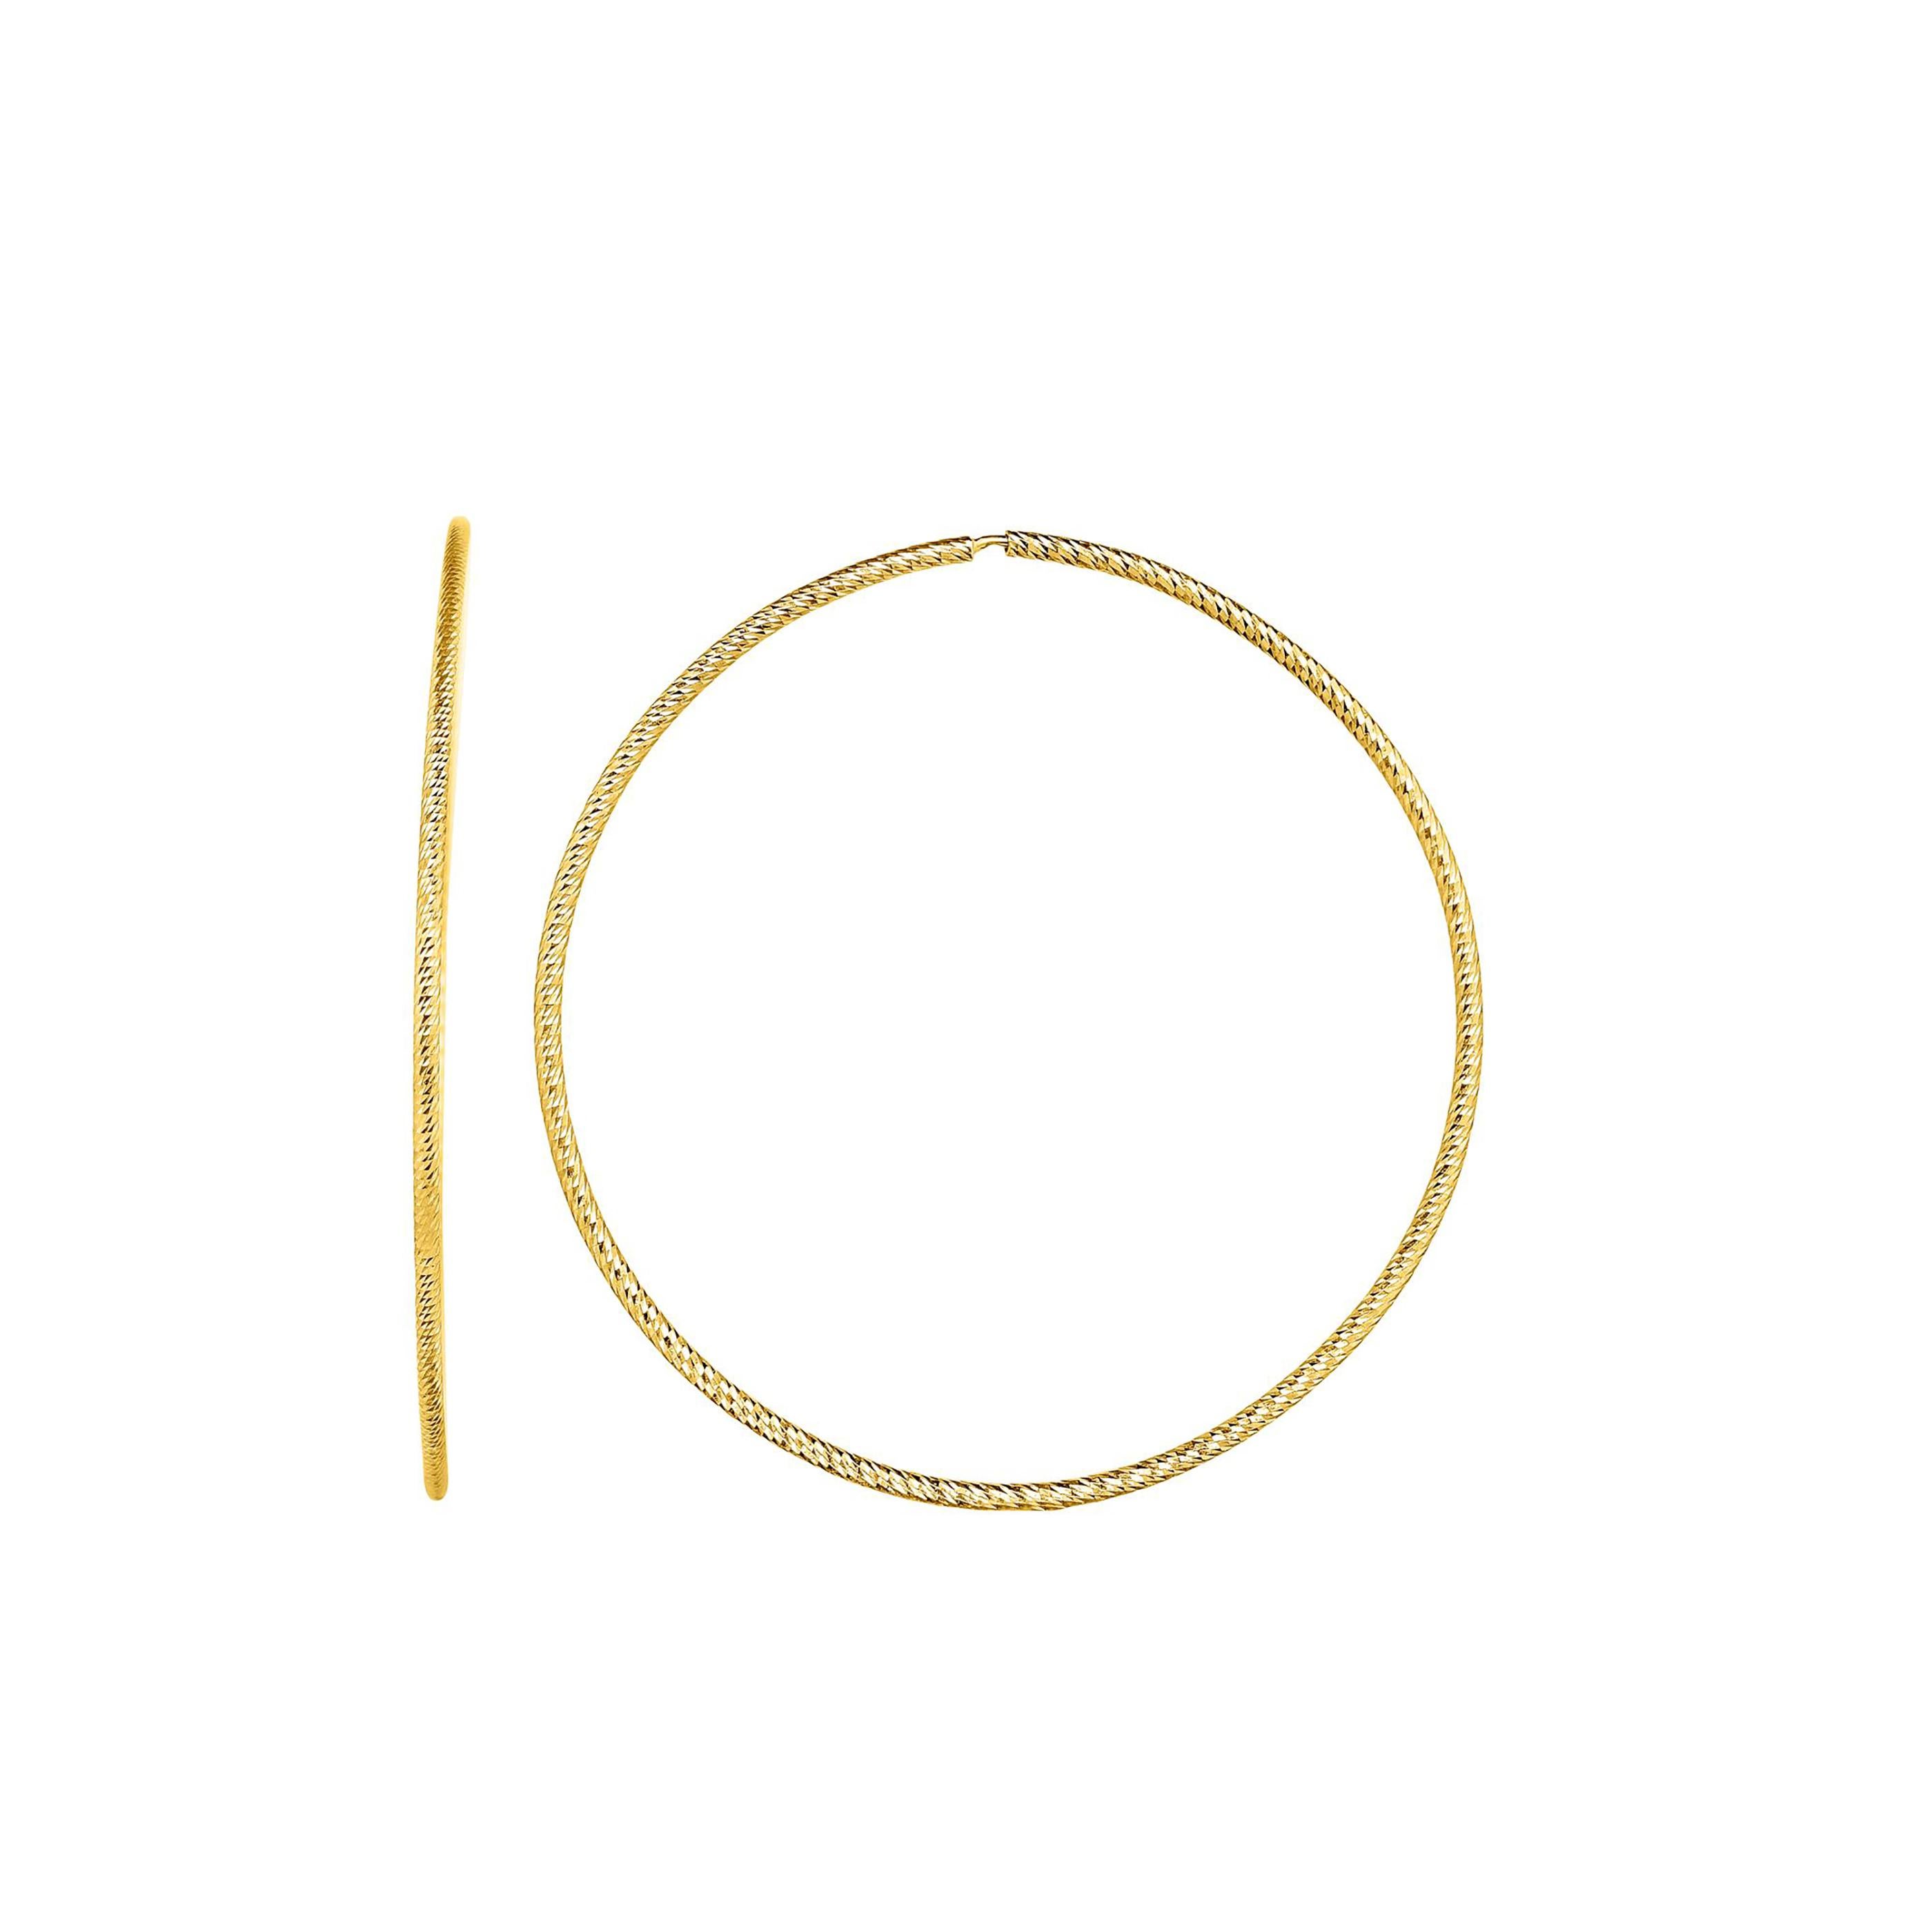 Fourteen karats yellow gold large circle hoop earrings
Endless Hoops
Textured design 
The diameter 1.5 inch 
Width of the circle 2 millimeter equals 0.08 inch
New Earrings
The latest and innovative fashion collections have been launched by all of